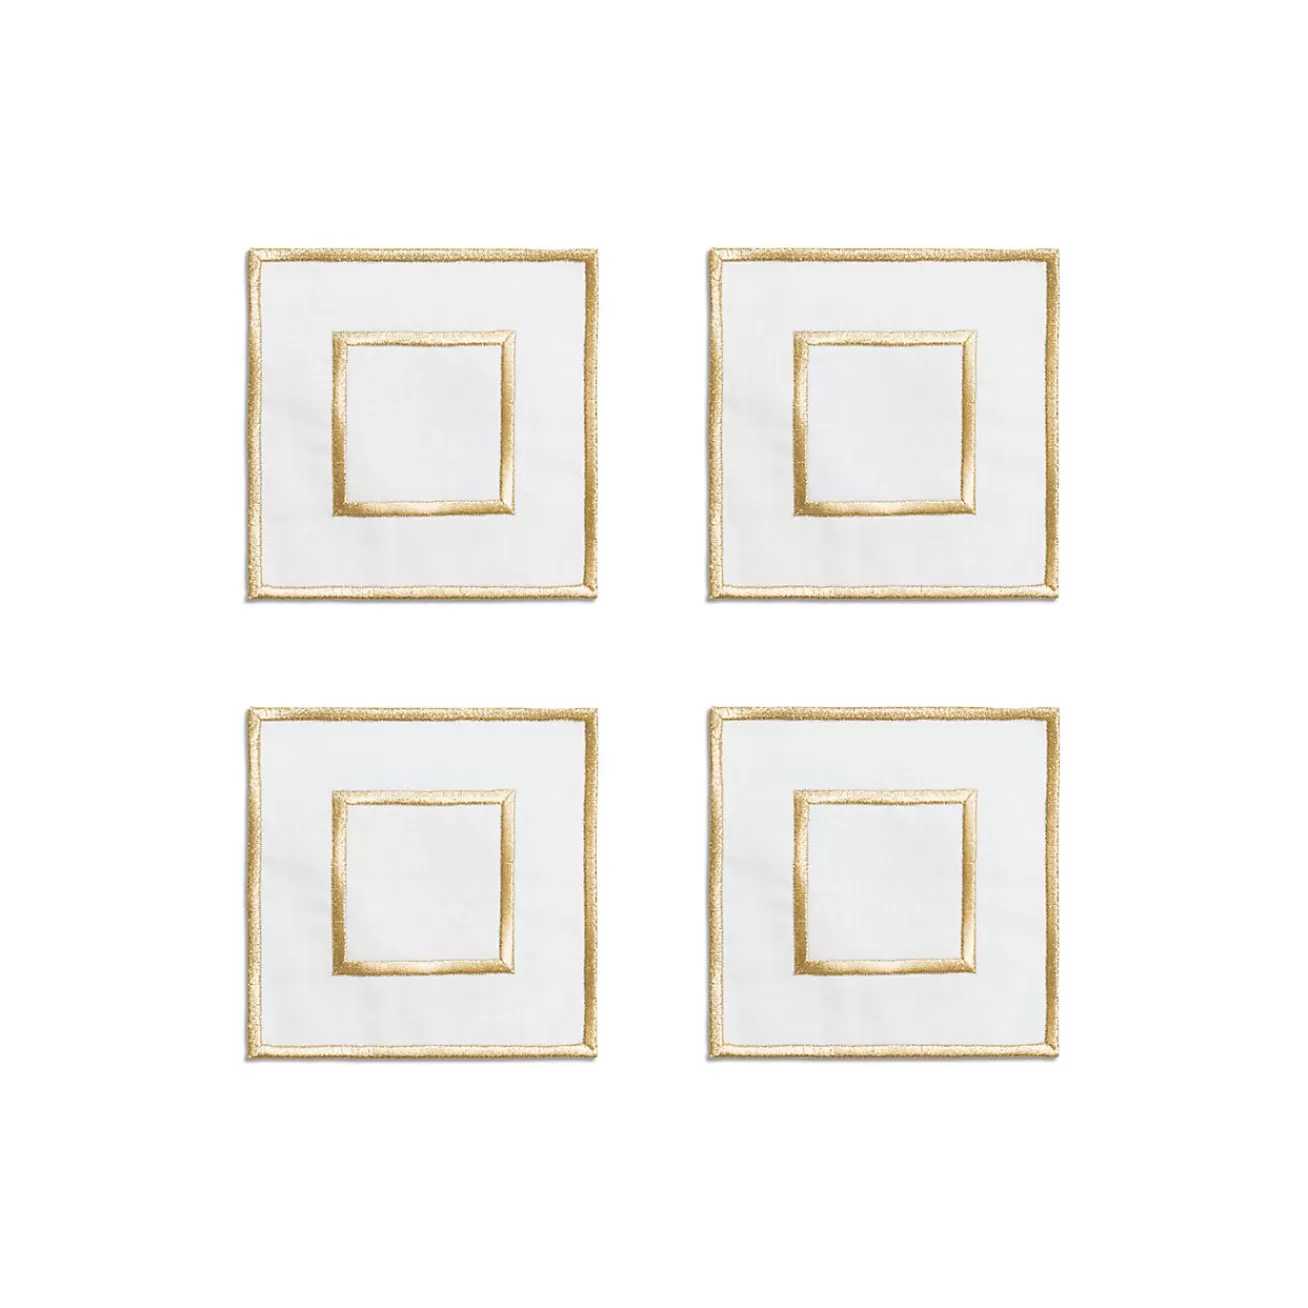 Tiffany & Co. Tiffany Home Essentials Embroidered Coasters in Linen, Set of Four | ^ Decor | Table Linens